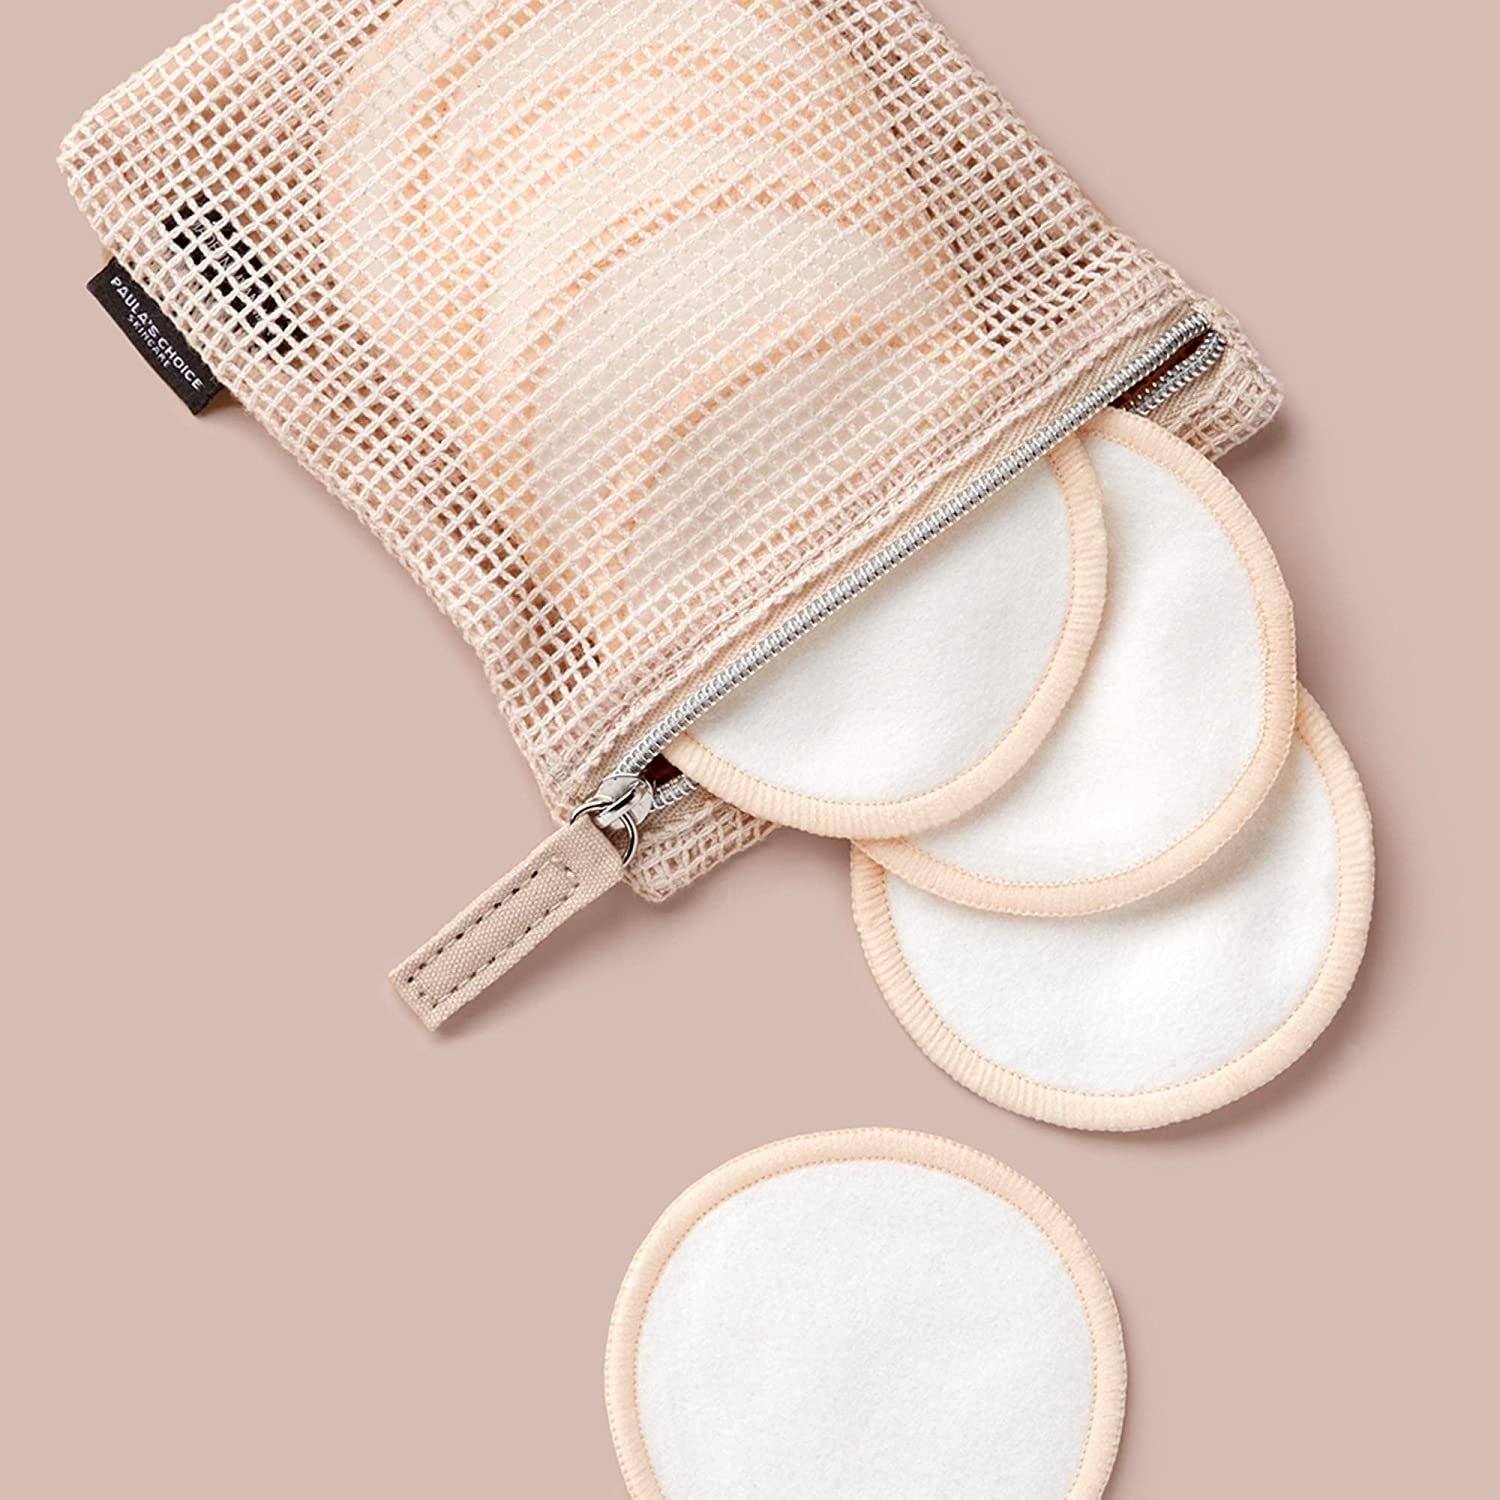 several reusable cotton pads coming out of its mesh bag